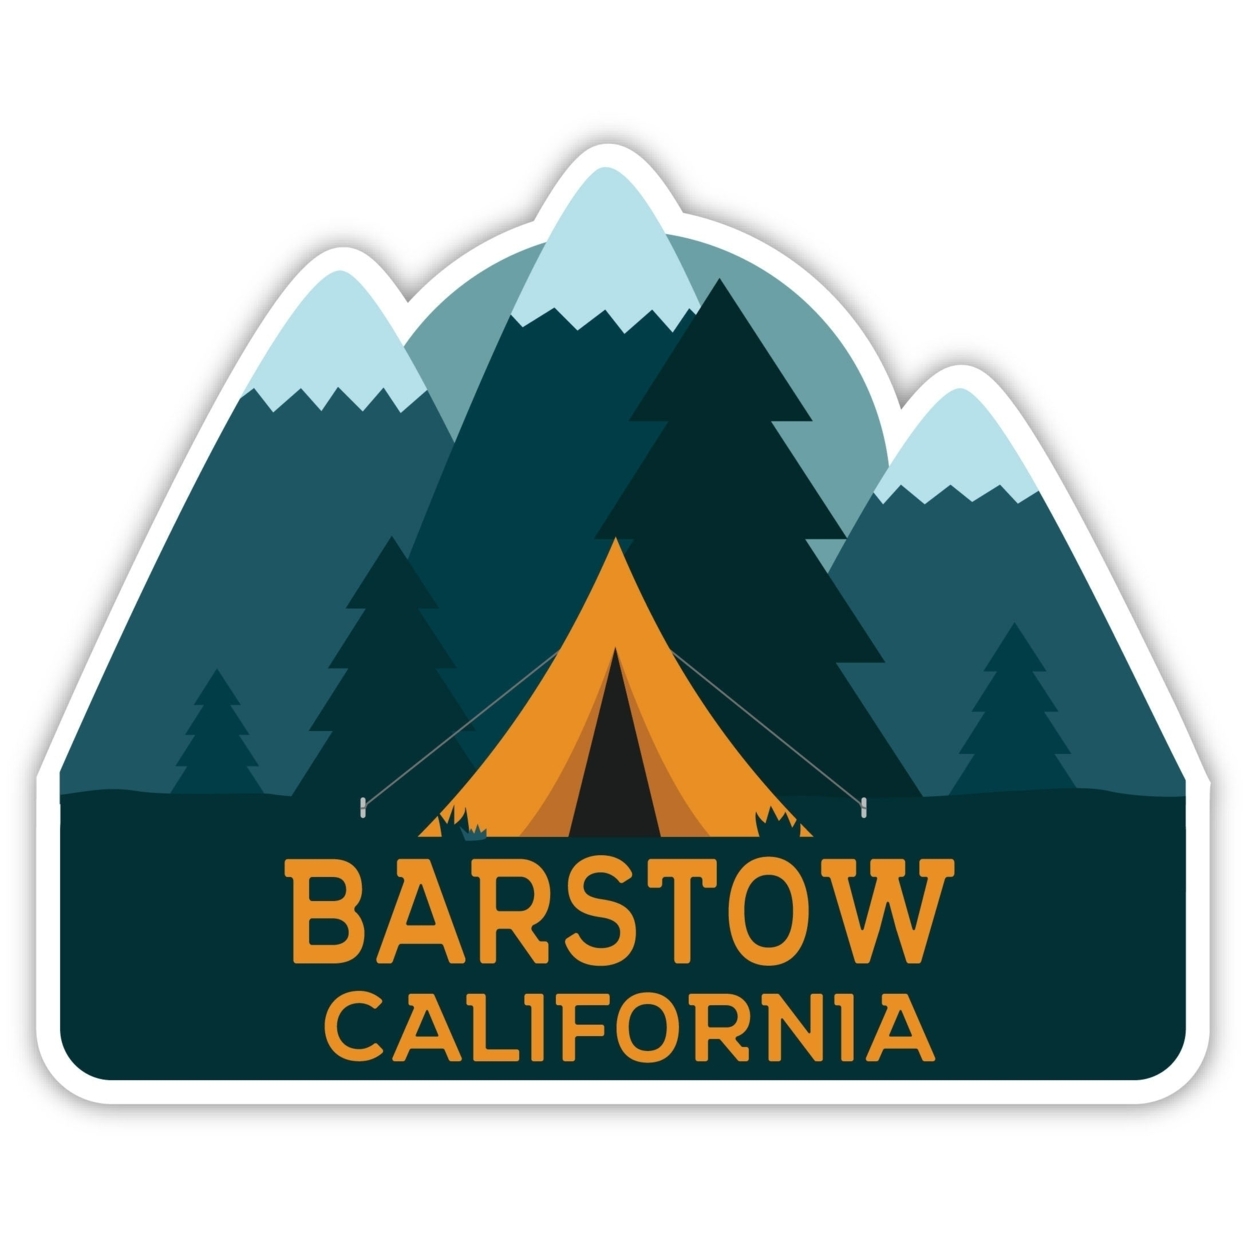 Barstow California Souvenir Decorative Stickers (Choose Theme And Size) - 4-Pack, 12-Inch, Tent